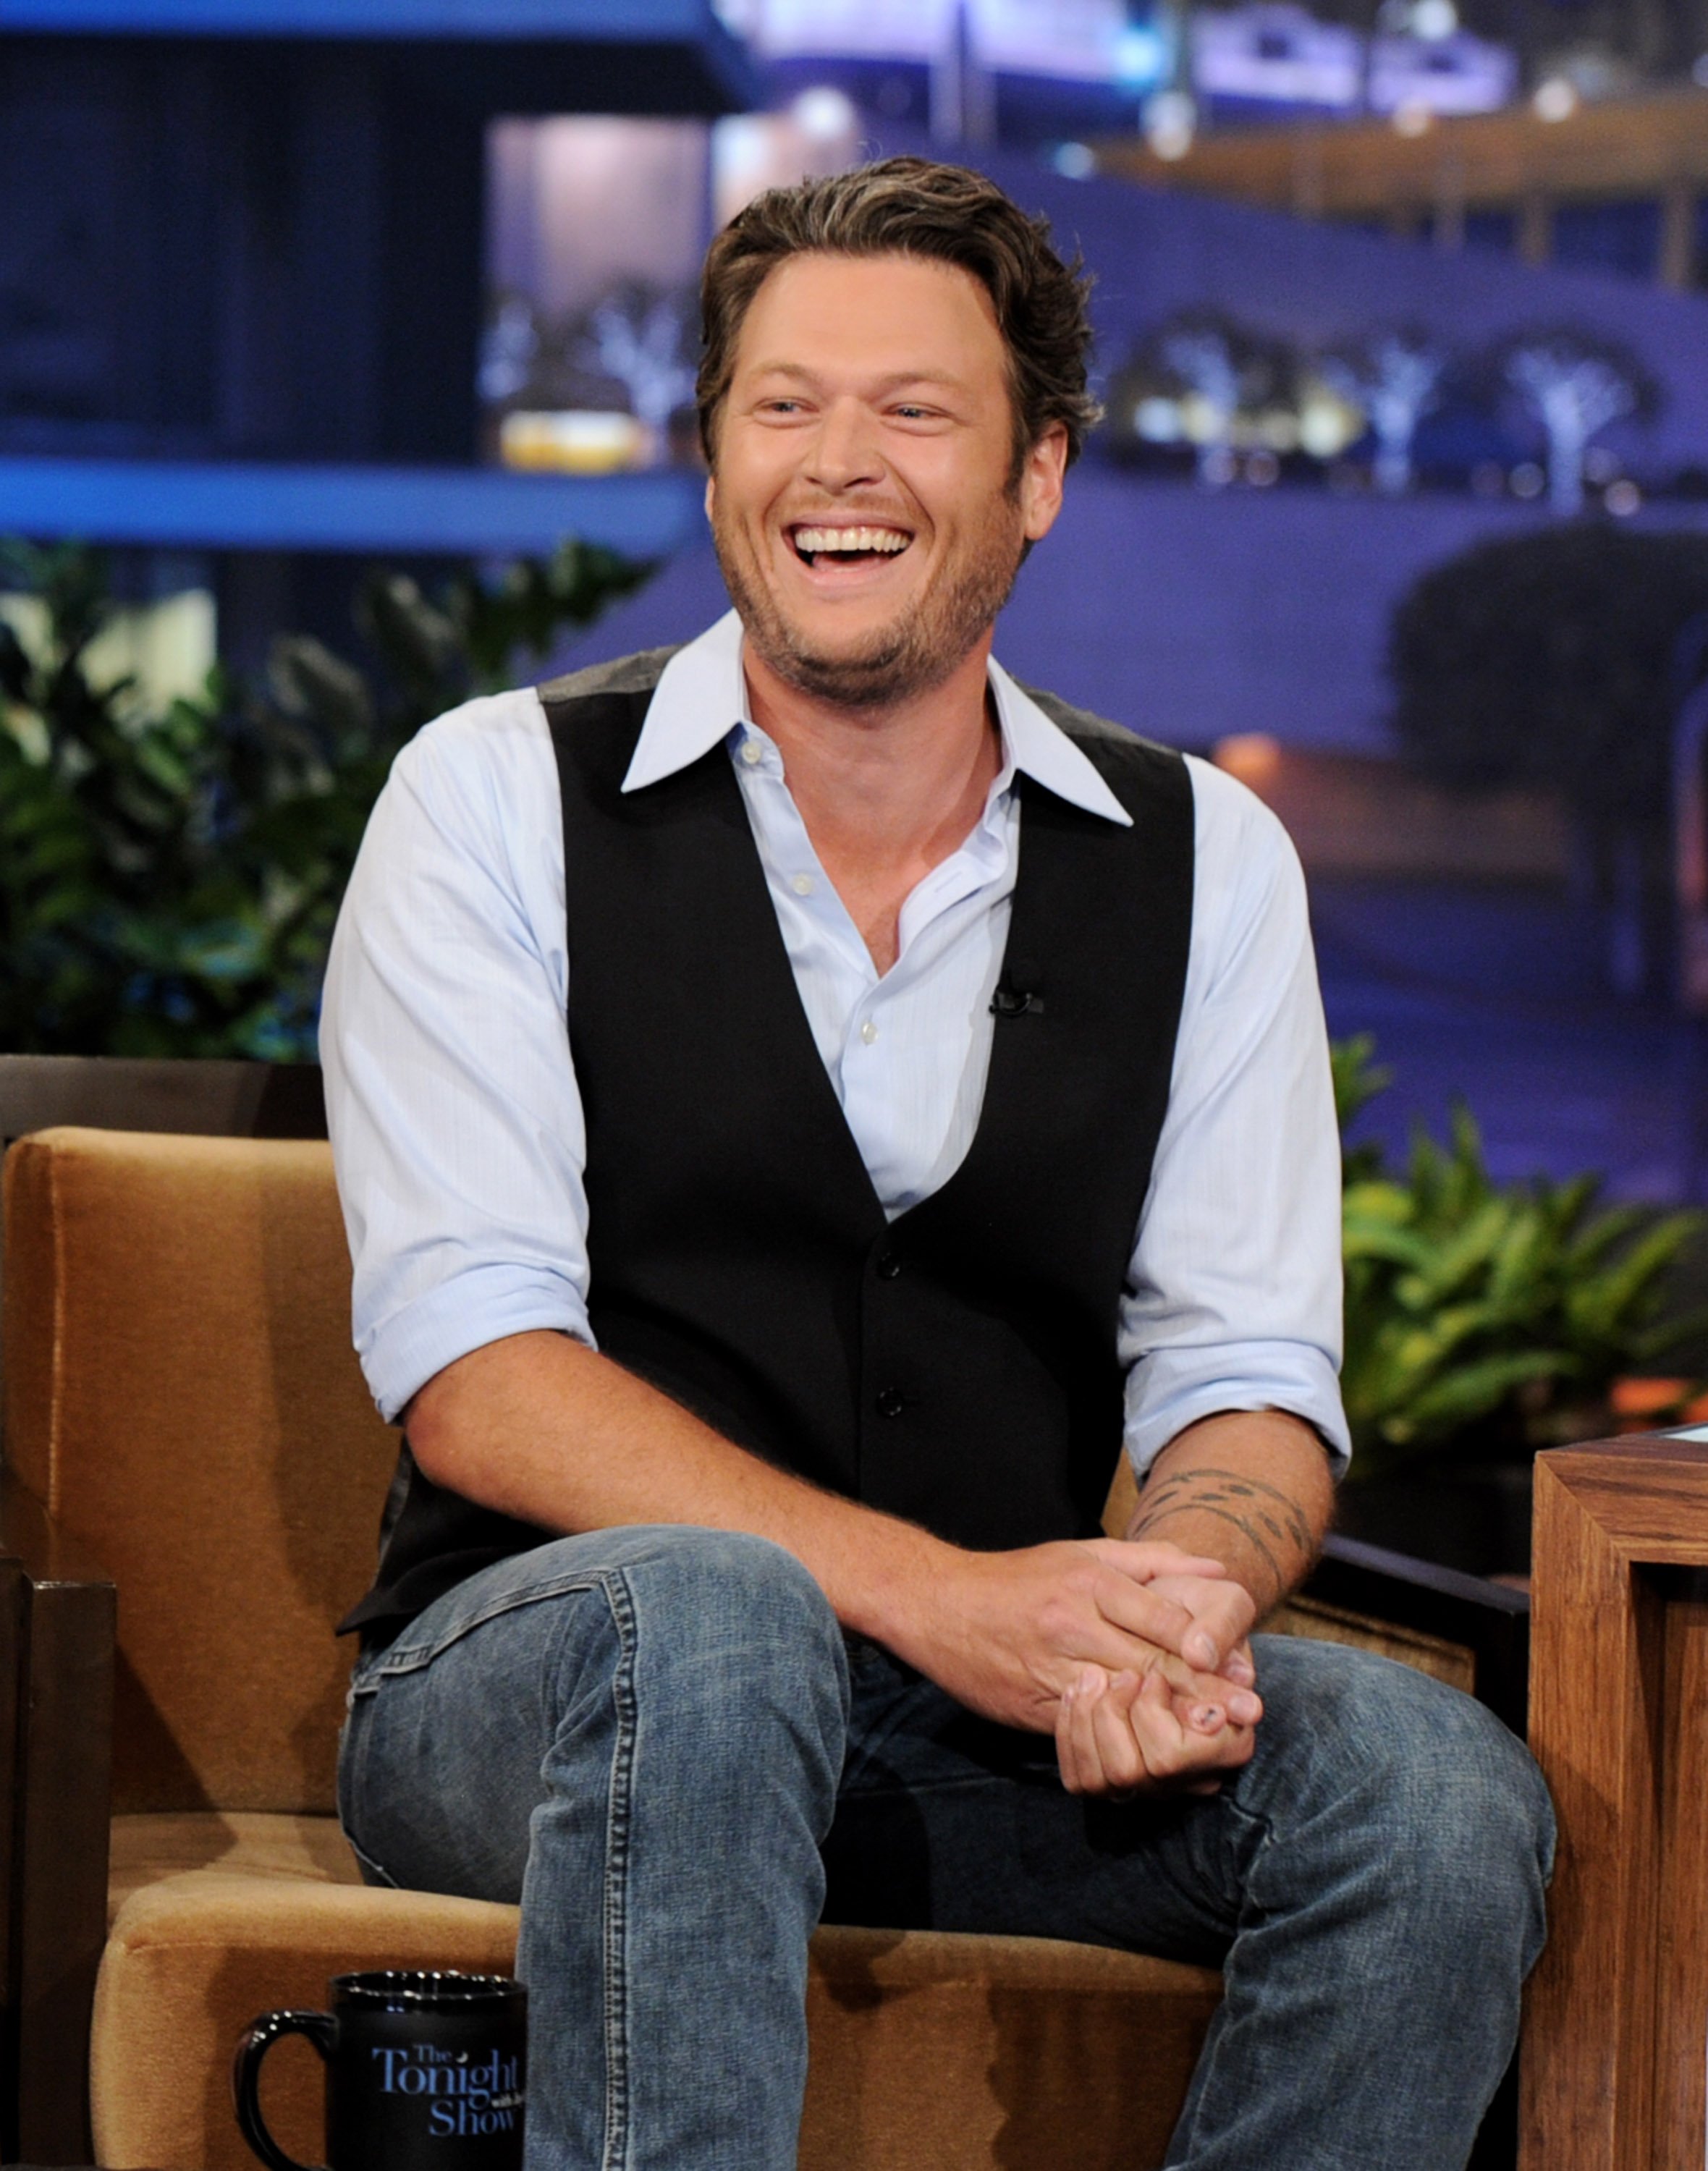 Blake Shelton appears on the Tonight Show with Jay Leno at NBC Studios on June 15, 2011, in Burbank, California. | Source: Getty Images.